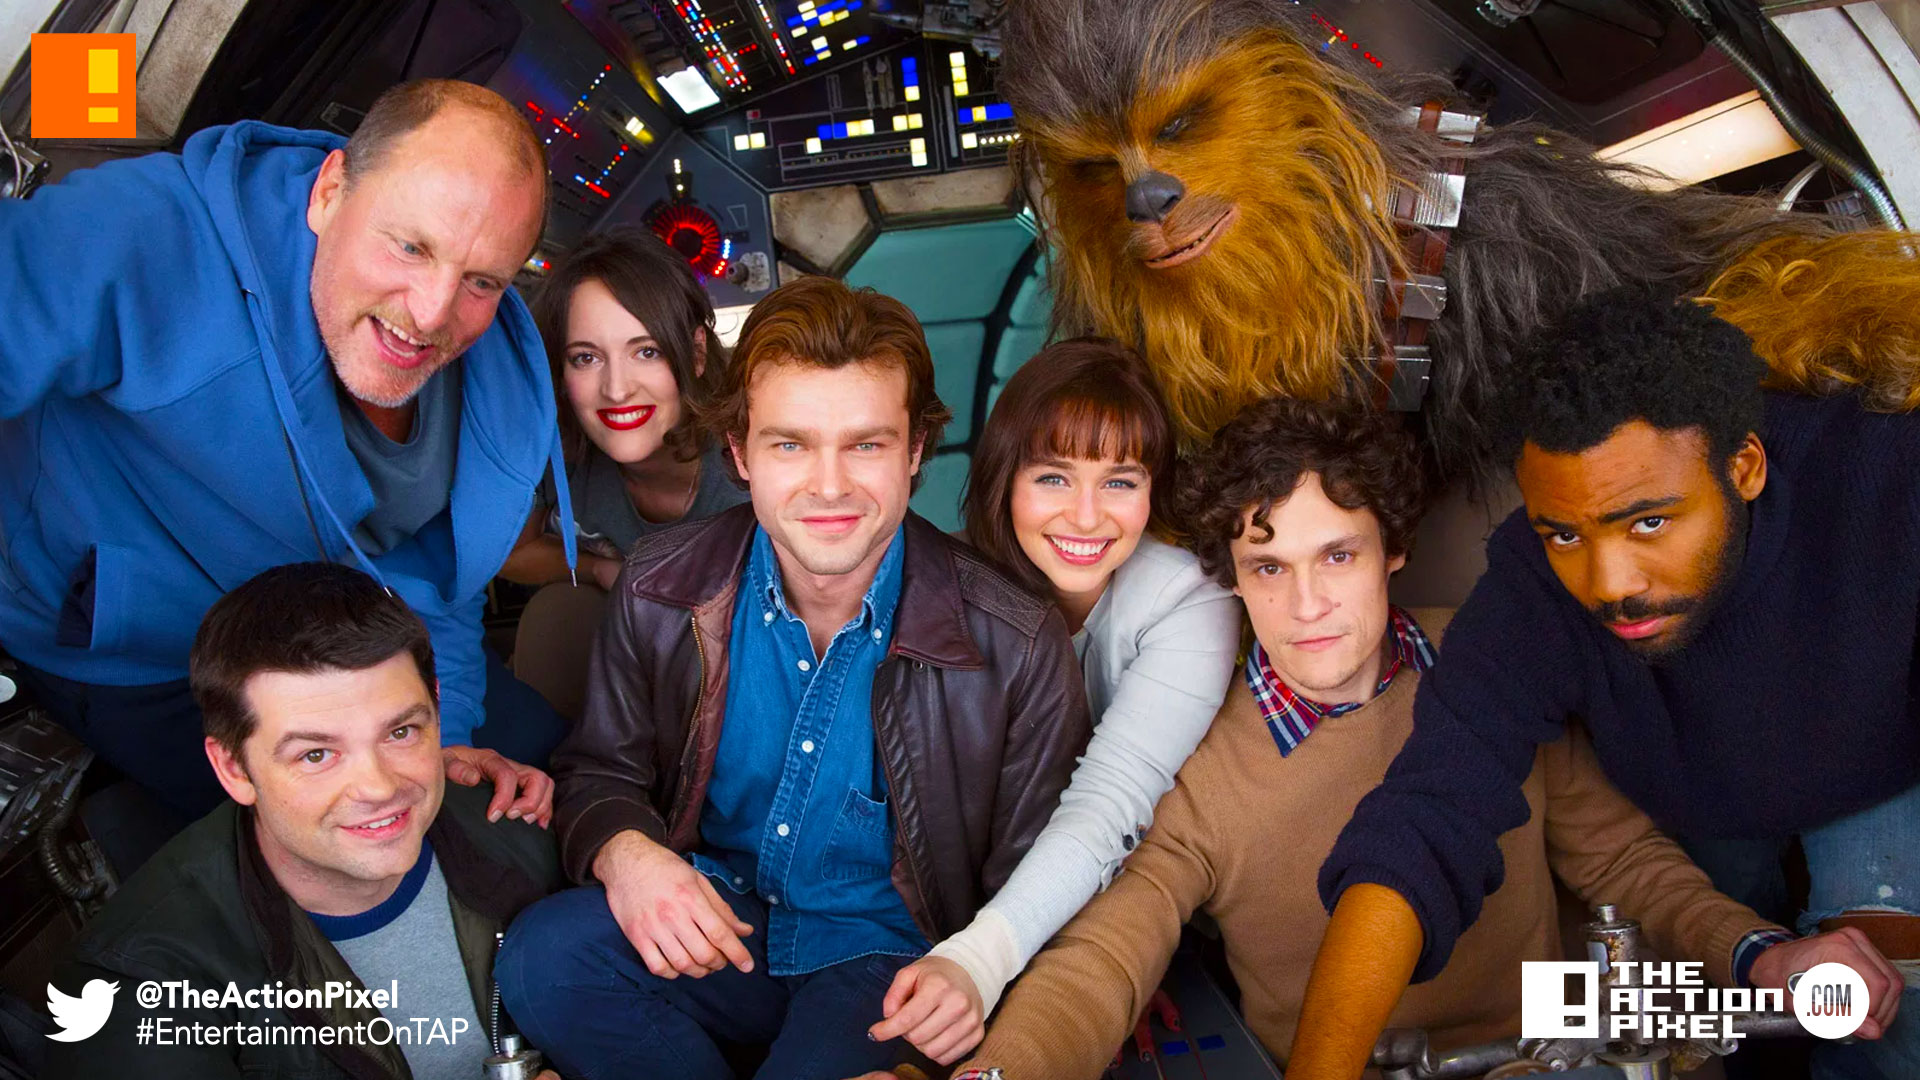 alden ehrenreich, han solo, the action pixel, star wars, solo movie, han solo solo movie, a star wars story, entertainment on tap, donald glover,woody harrelson